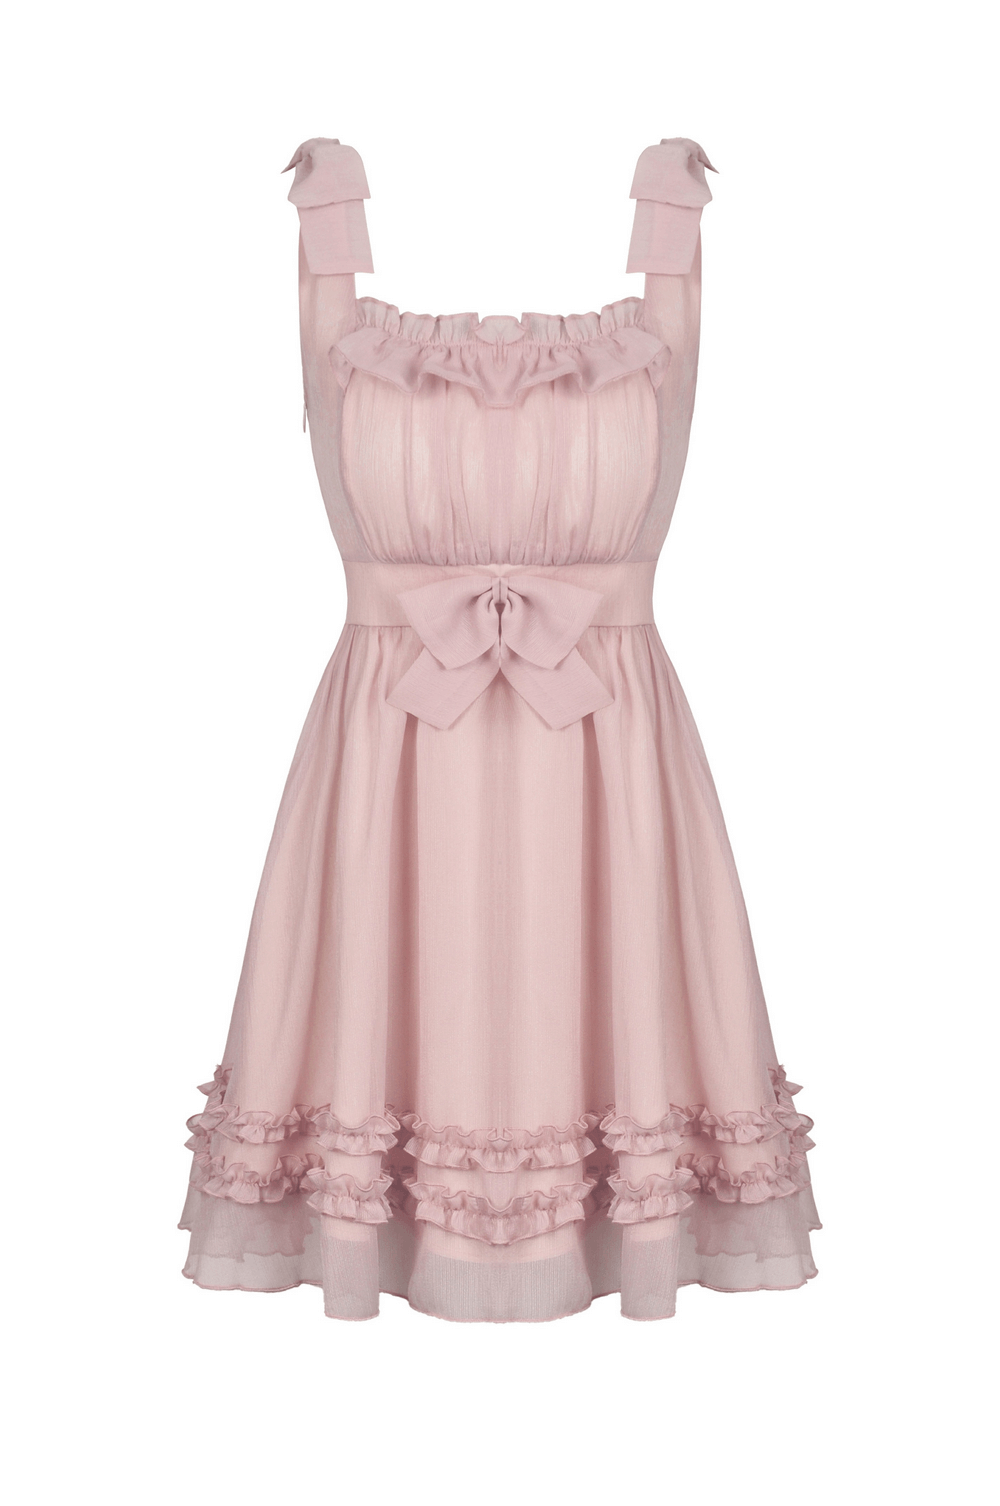 Elegant Pink Ruffle Doll Dress with Sweet Front Bow